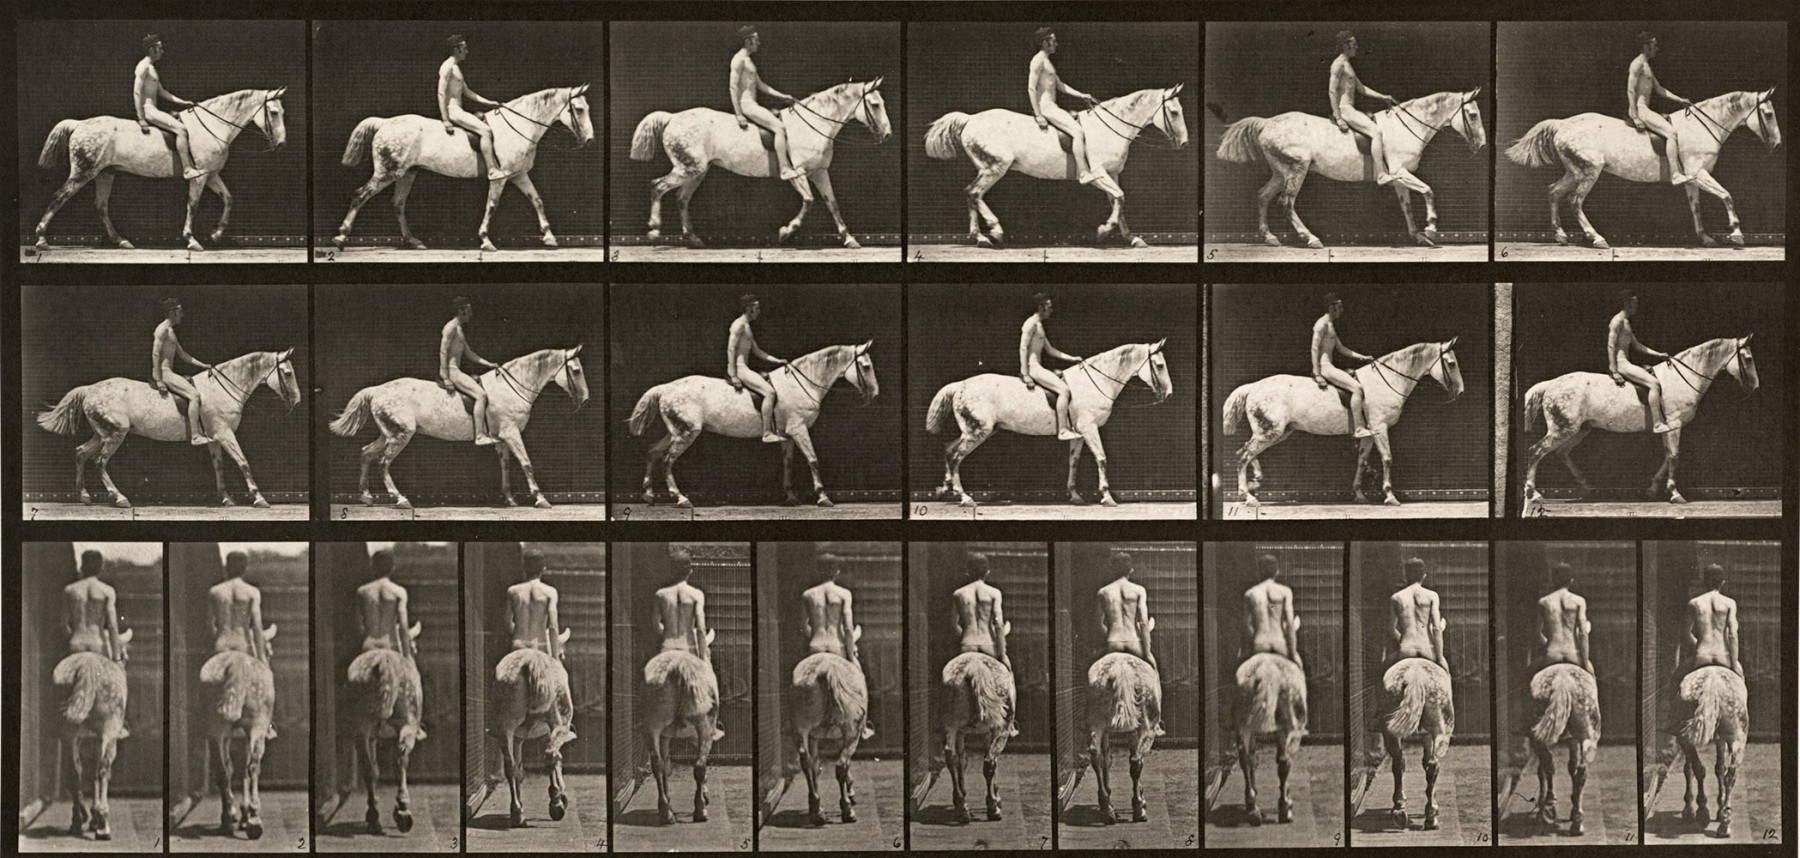 Sequence of black and white photos showing the movements of a horse walking with a nude man riding on its saddle